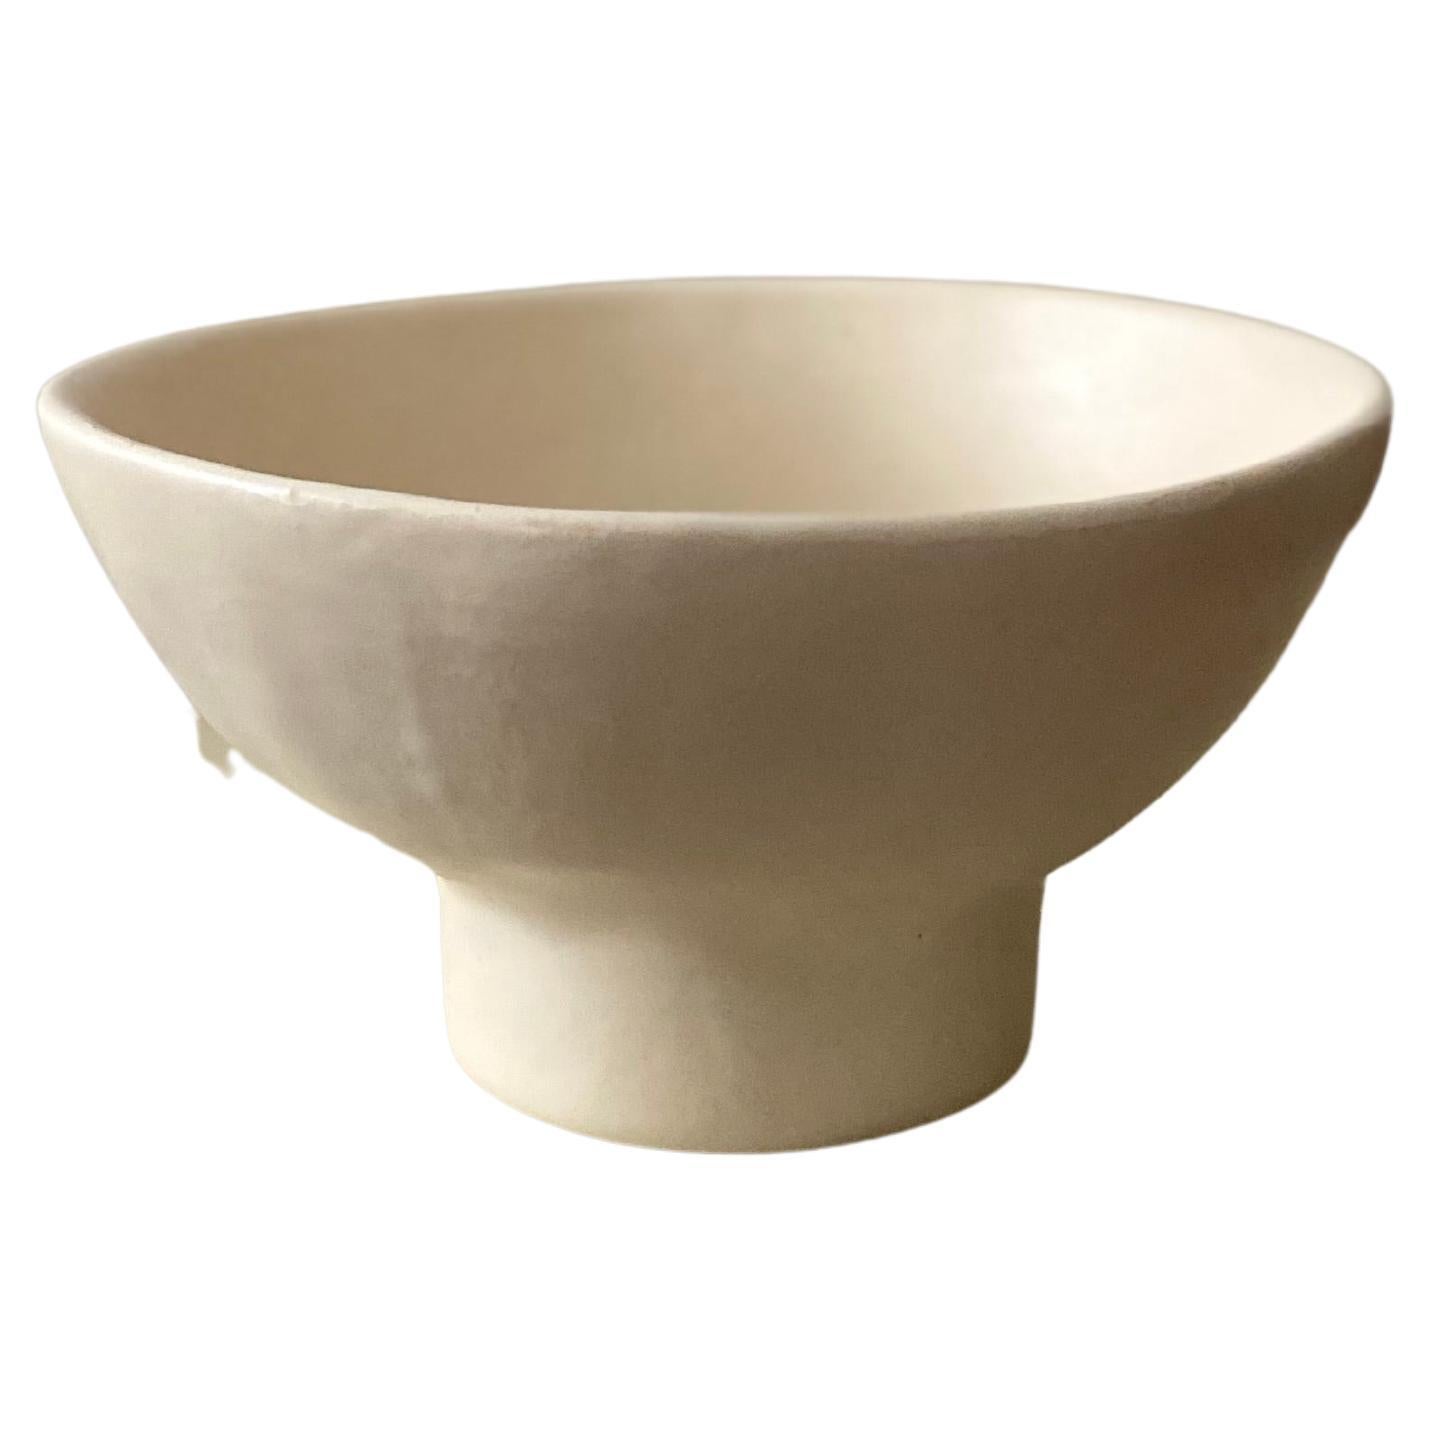 Ceramic Bowl Organic Shape Ideal for Ramen and Fruit Matte Neutral Finish For Sale